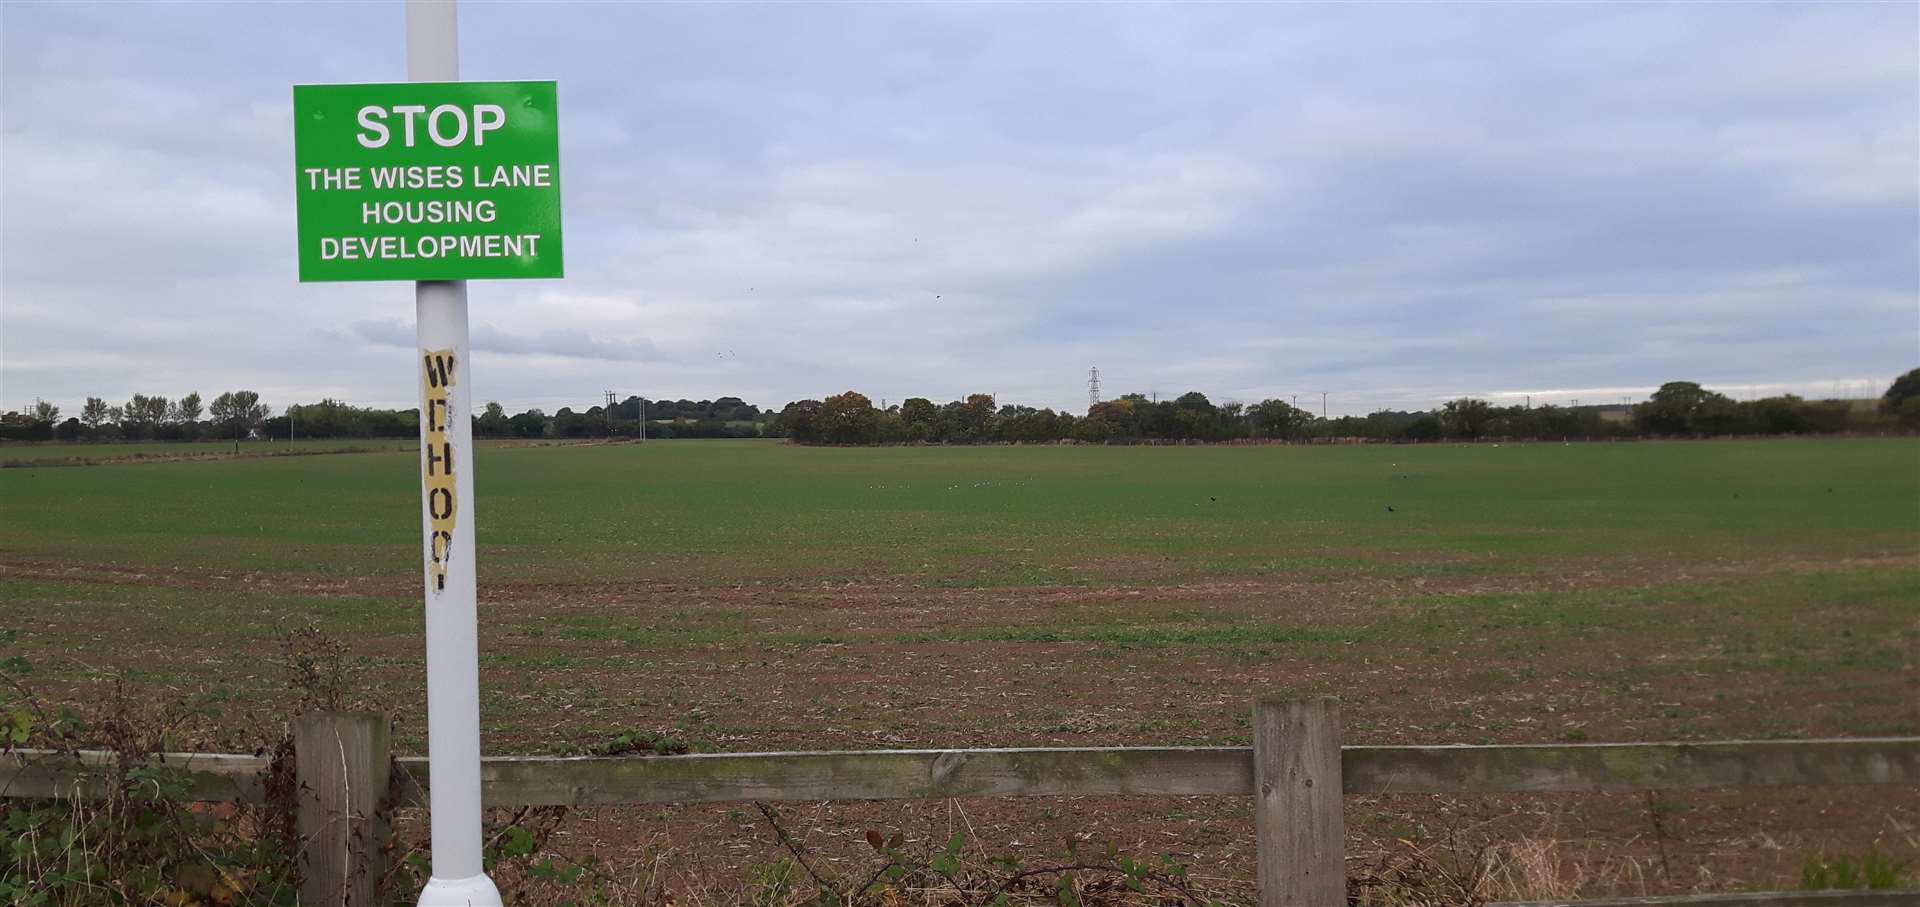 Campaigners have fought against plans for homes off Cryalls Lane and Wises Lane in Borden